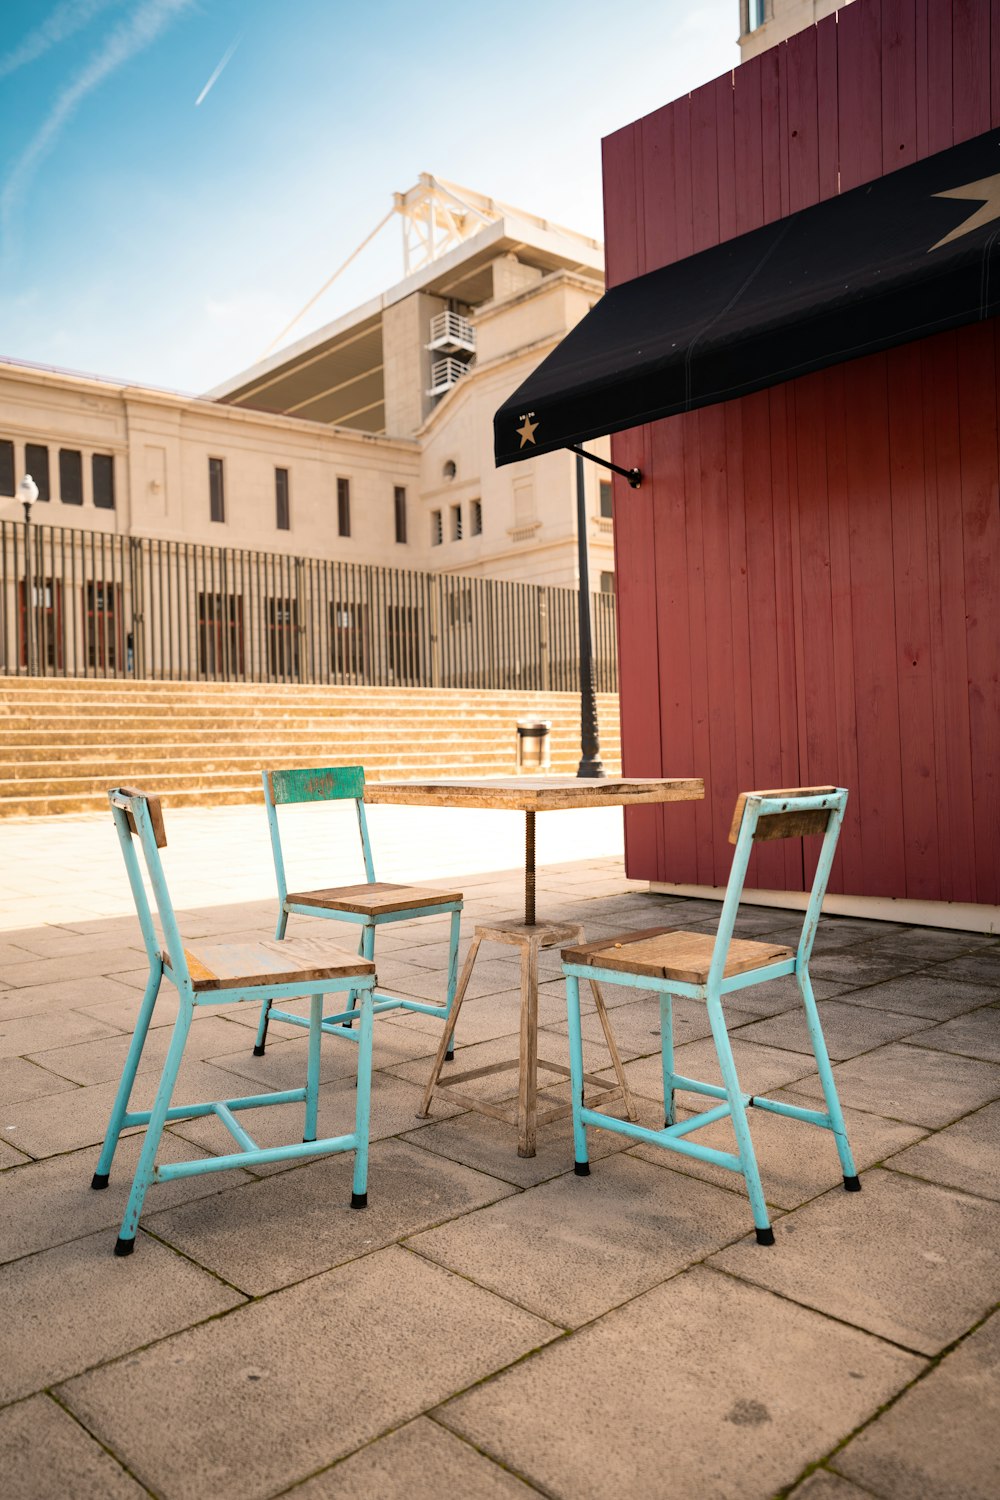 brown wooden table and chairs near red wooden building during daytime